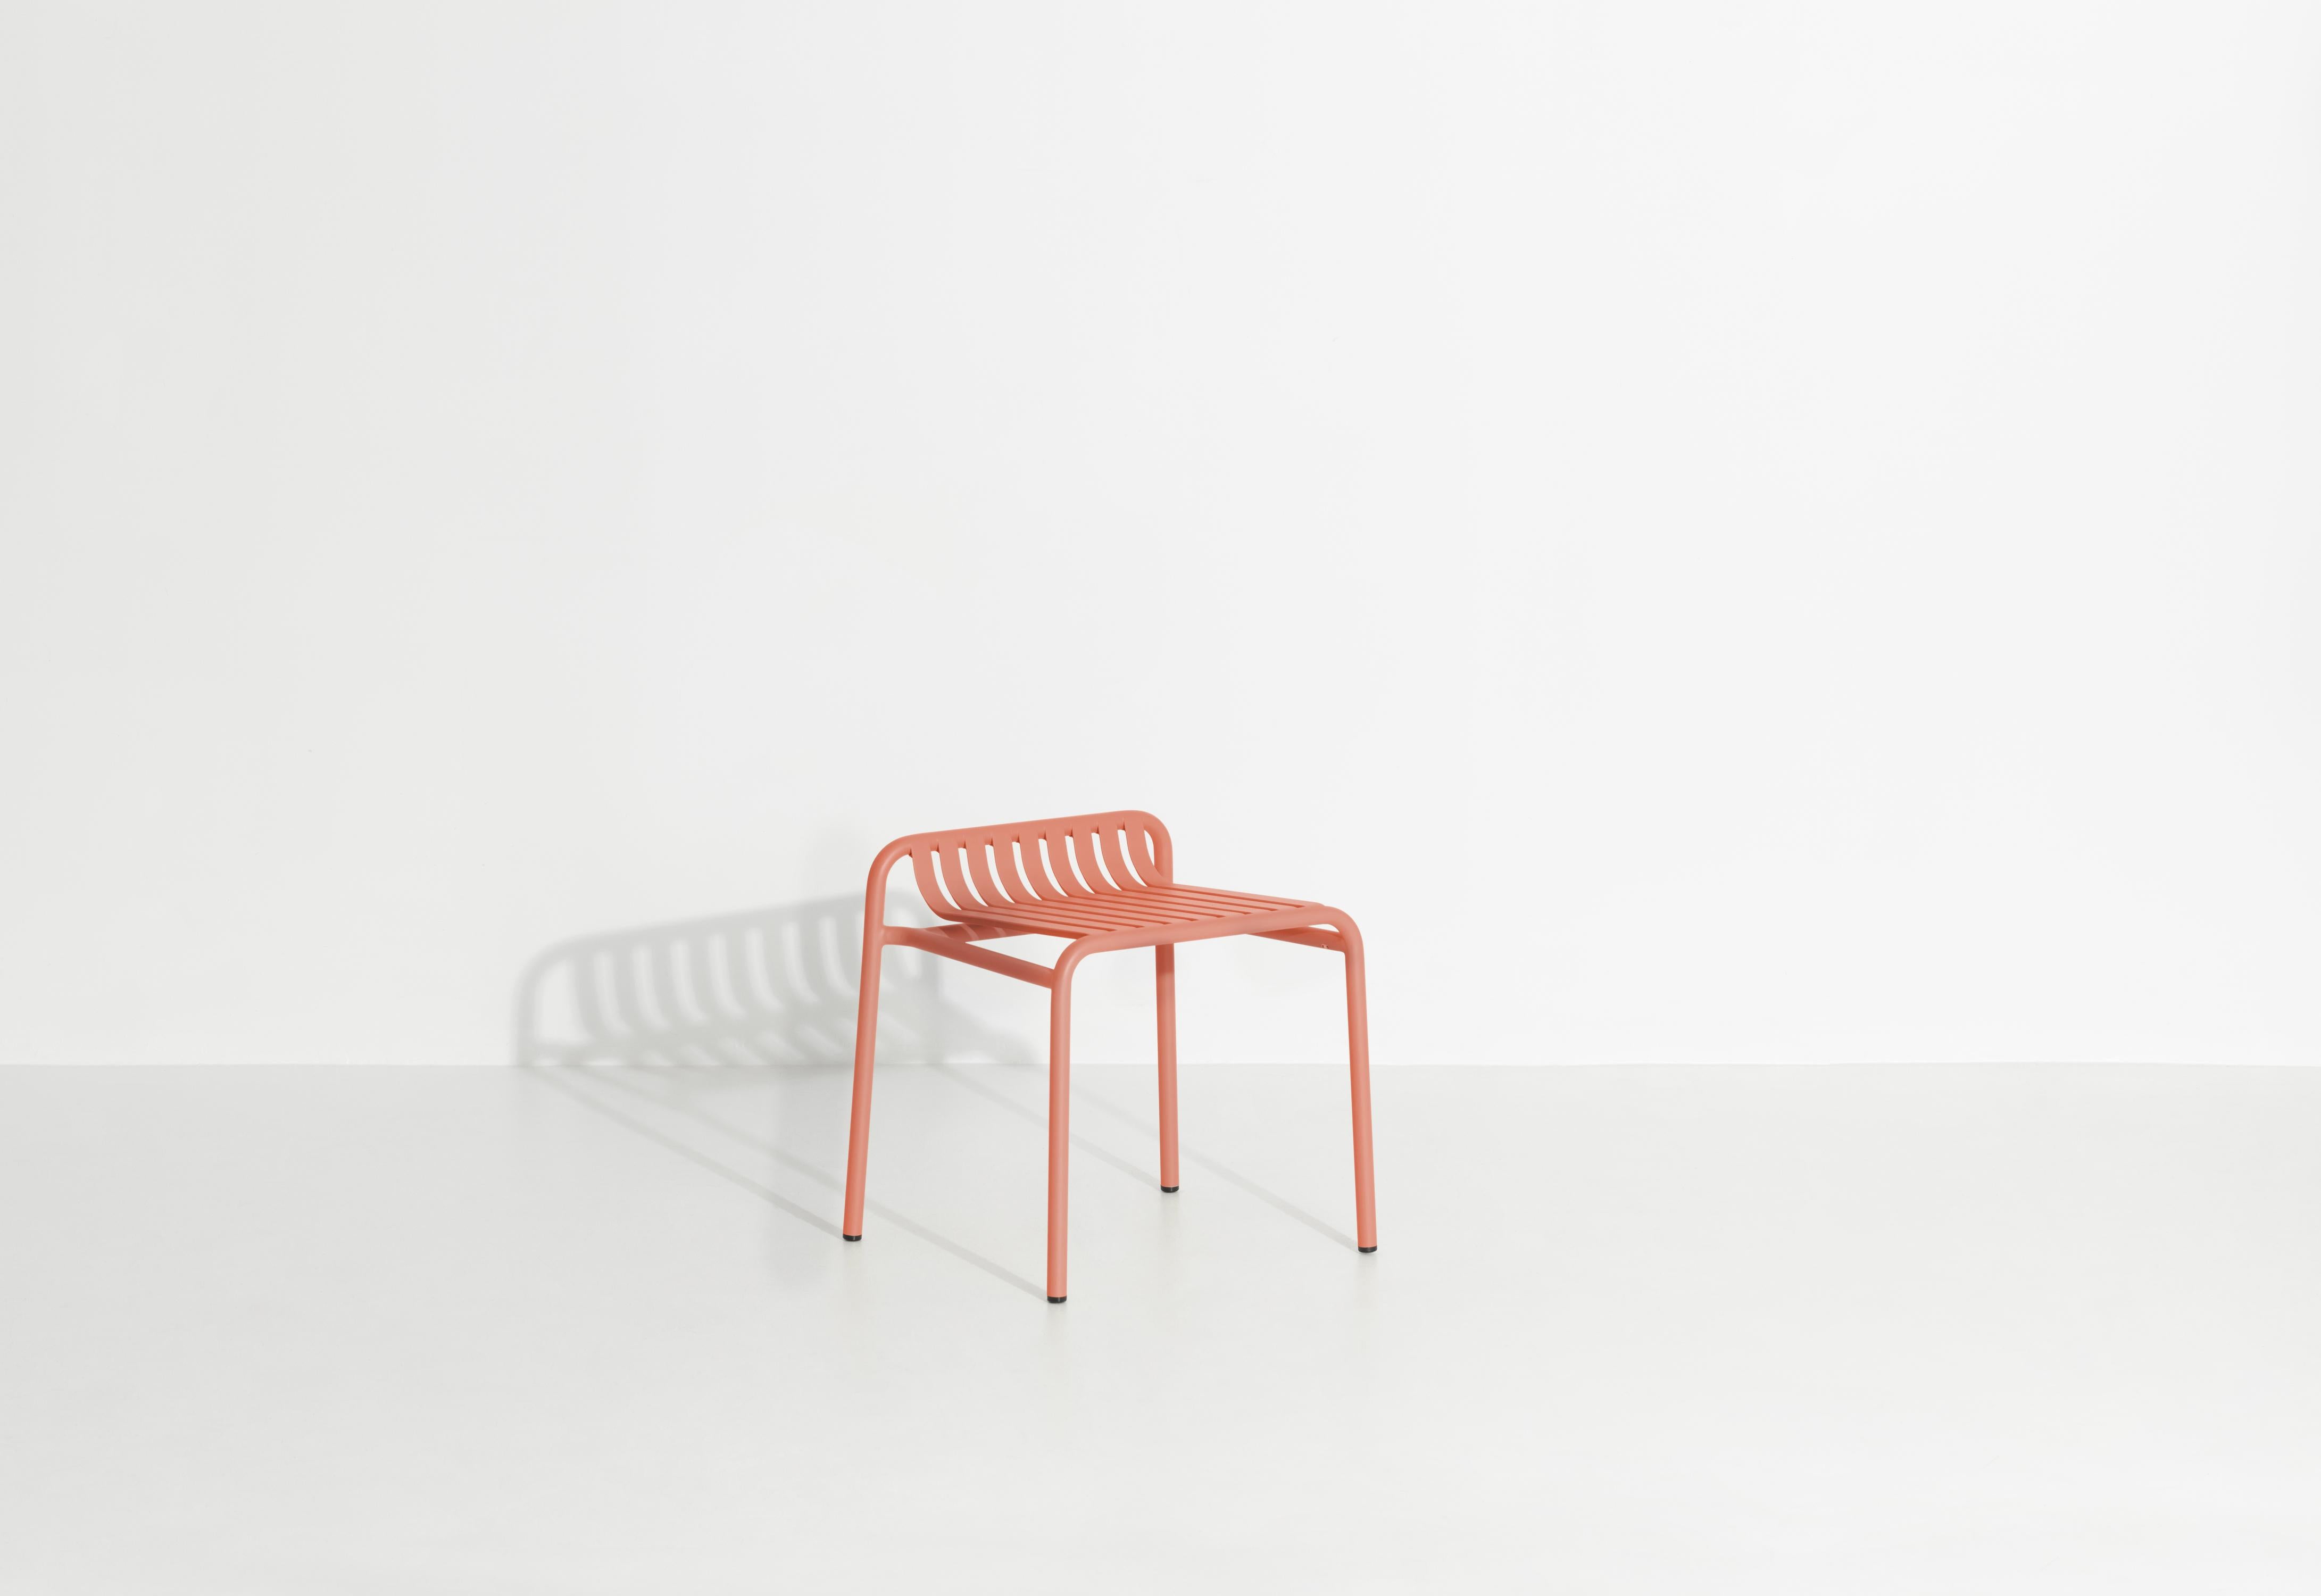 Petite Friture Week-End Stool in Coral Aluminium by Studio BrichetZiegler, 2017

The week-end collection is a full range of outdoor furniture, in aluminium grained epoxy paint, matt finish, that includes 18 functions and 8 colours for the retail